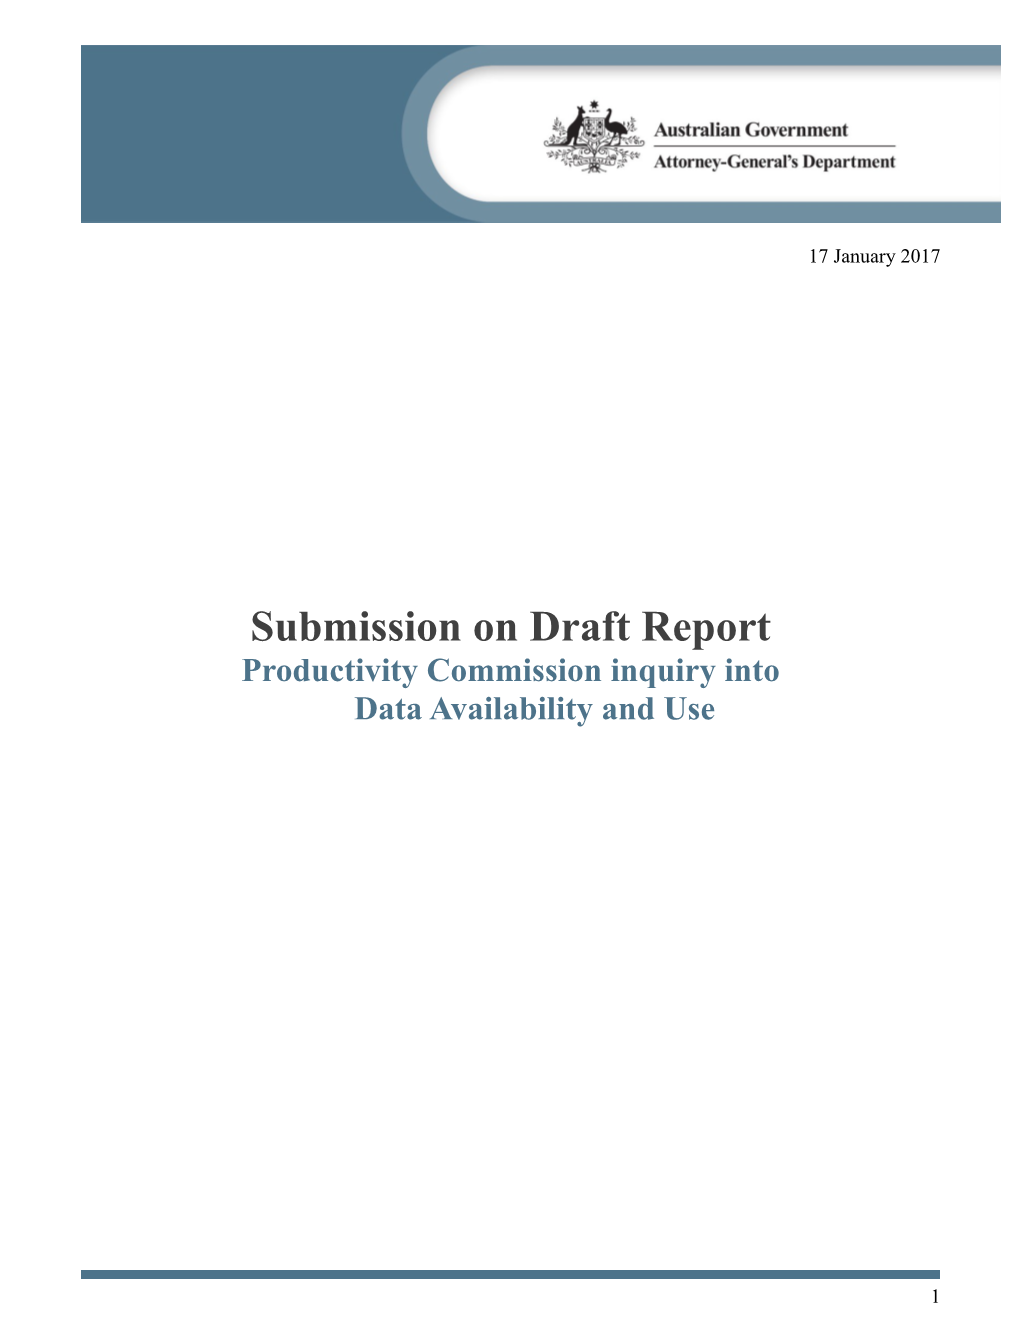 Submission DR334 - Attorney General's Department - Data Availability and Use - Public Inquiry